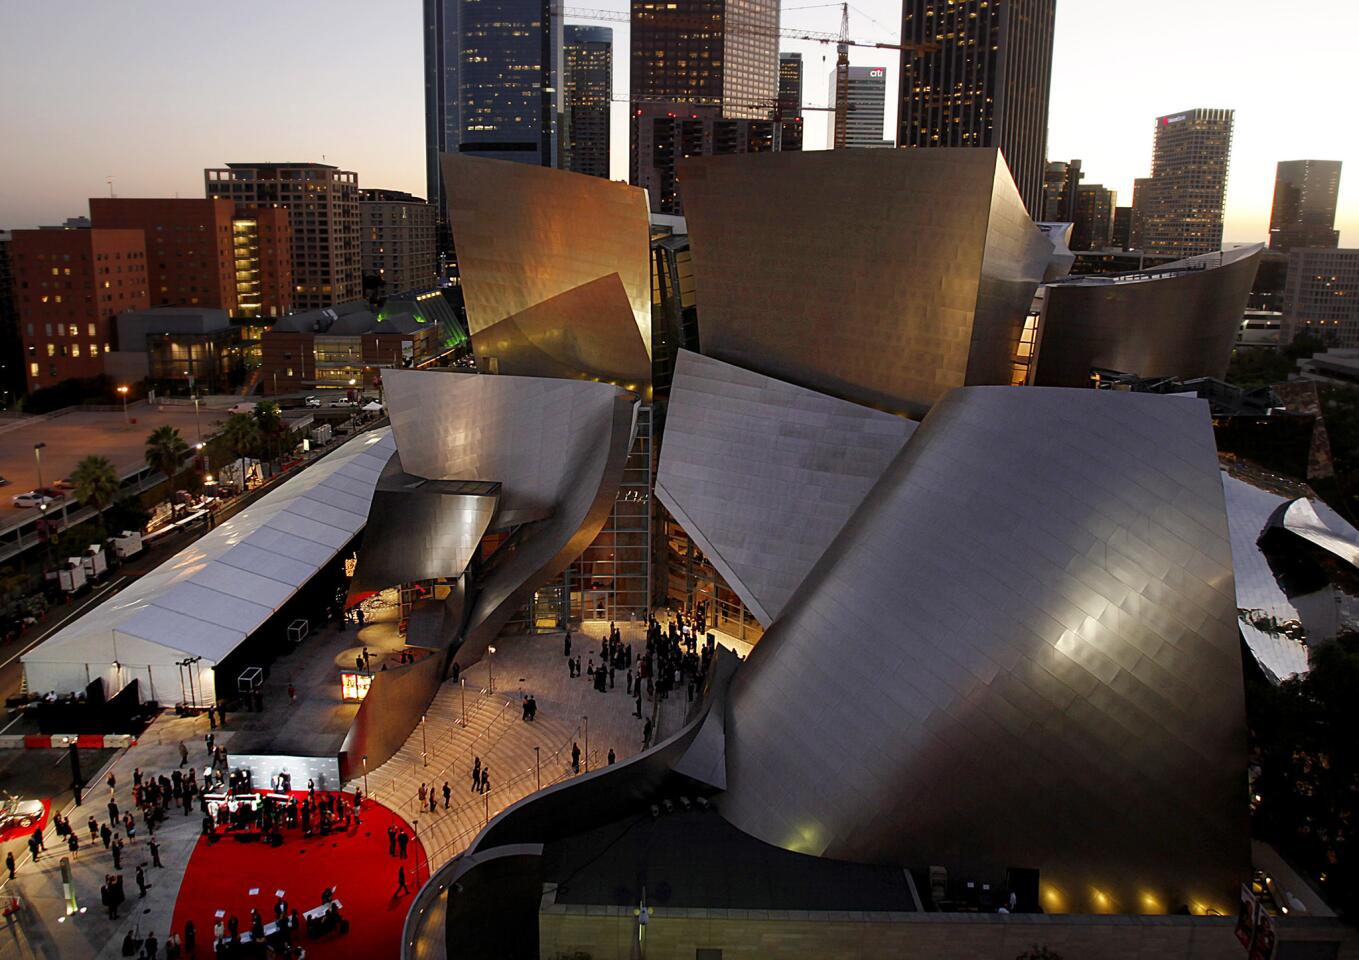 10th anniversary of the opening of Walt Disney Concert Hall